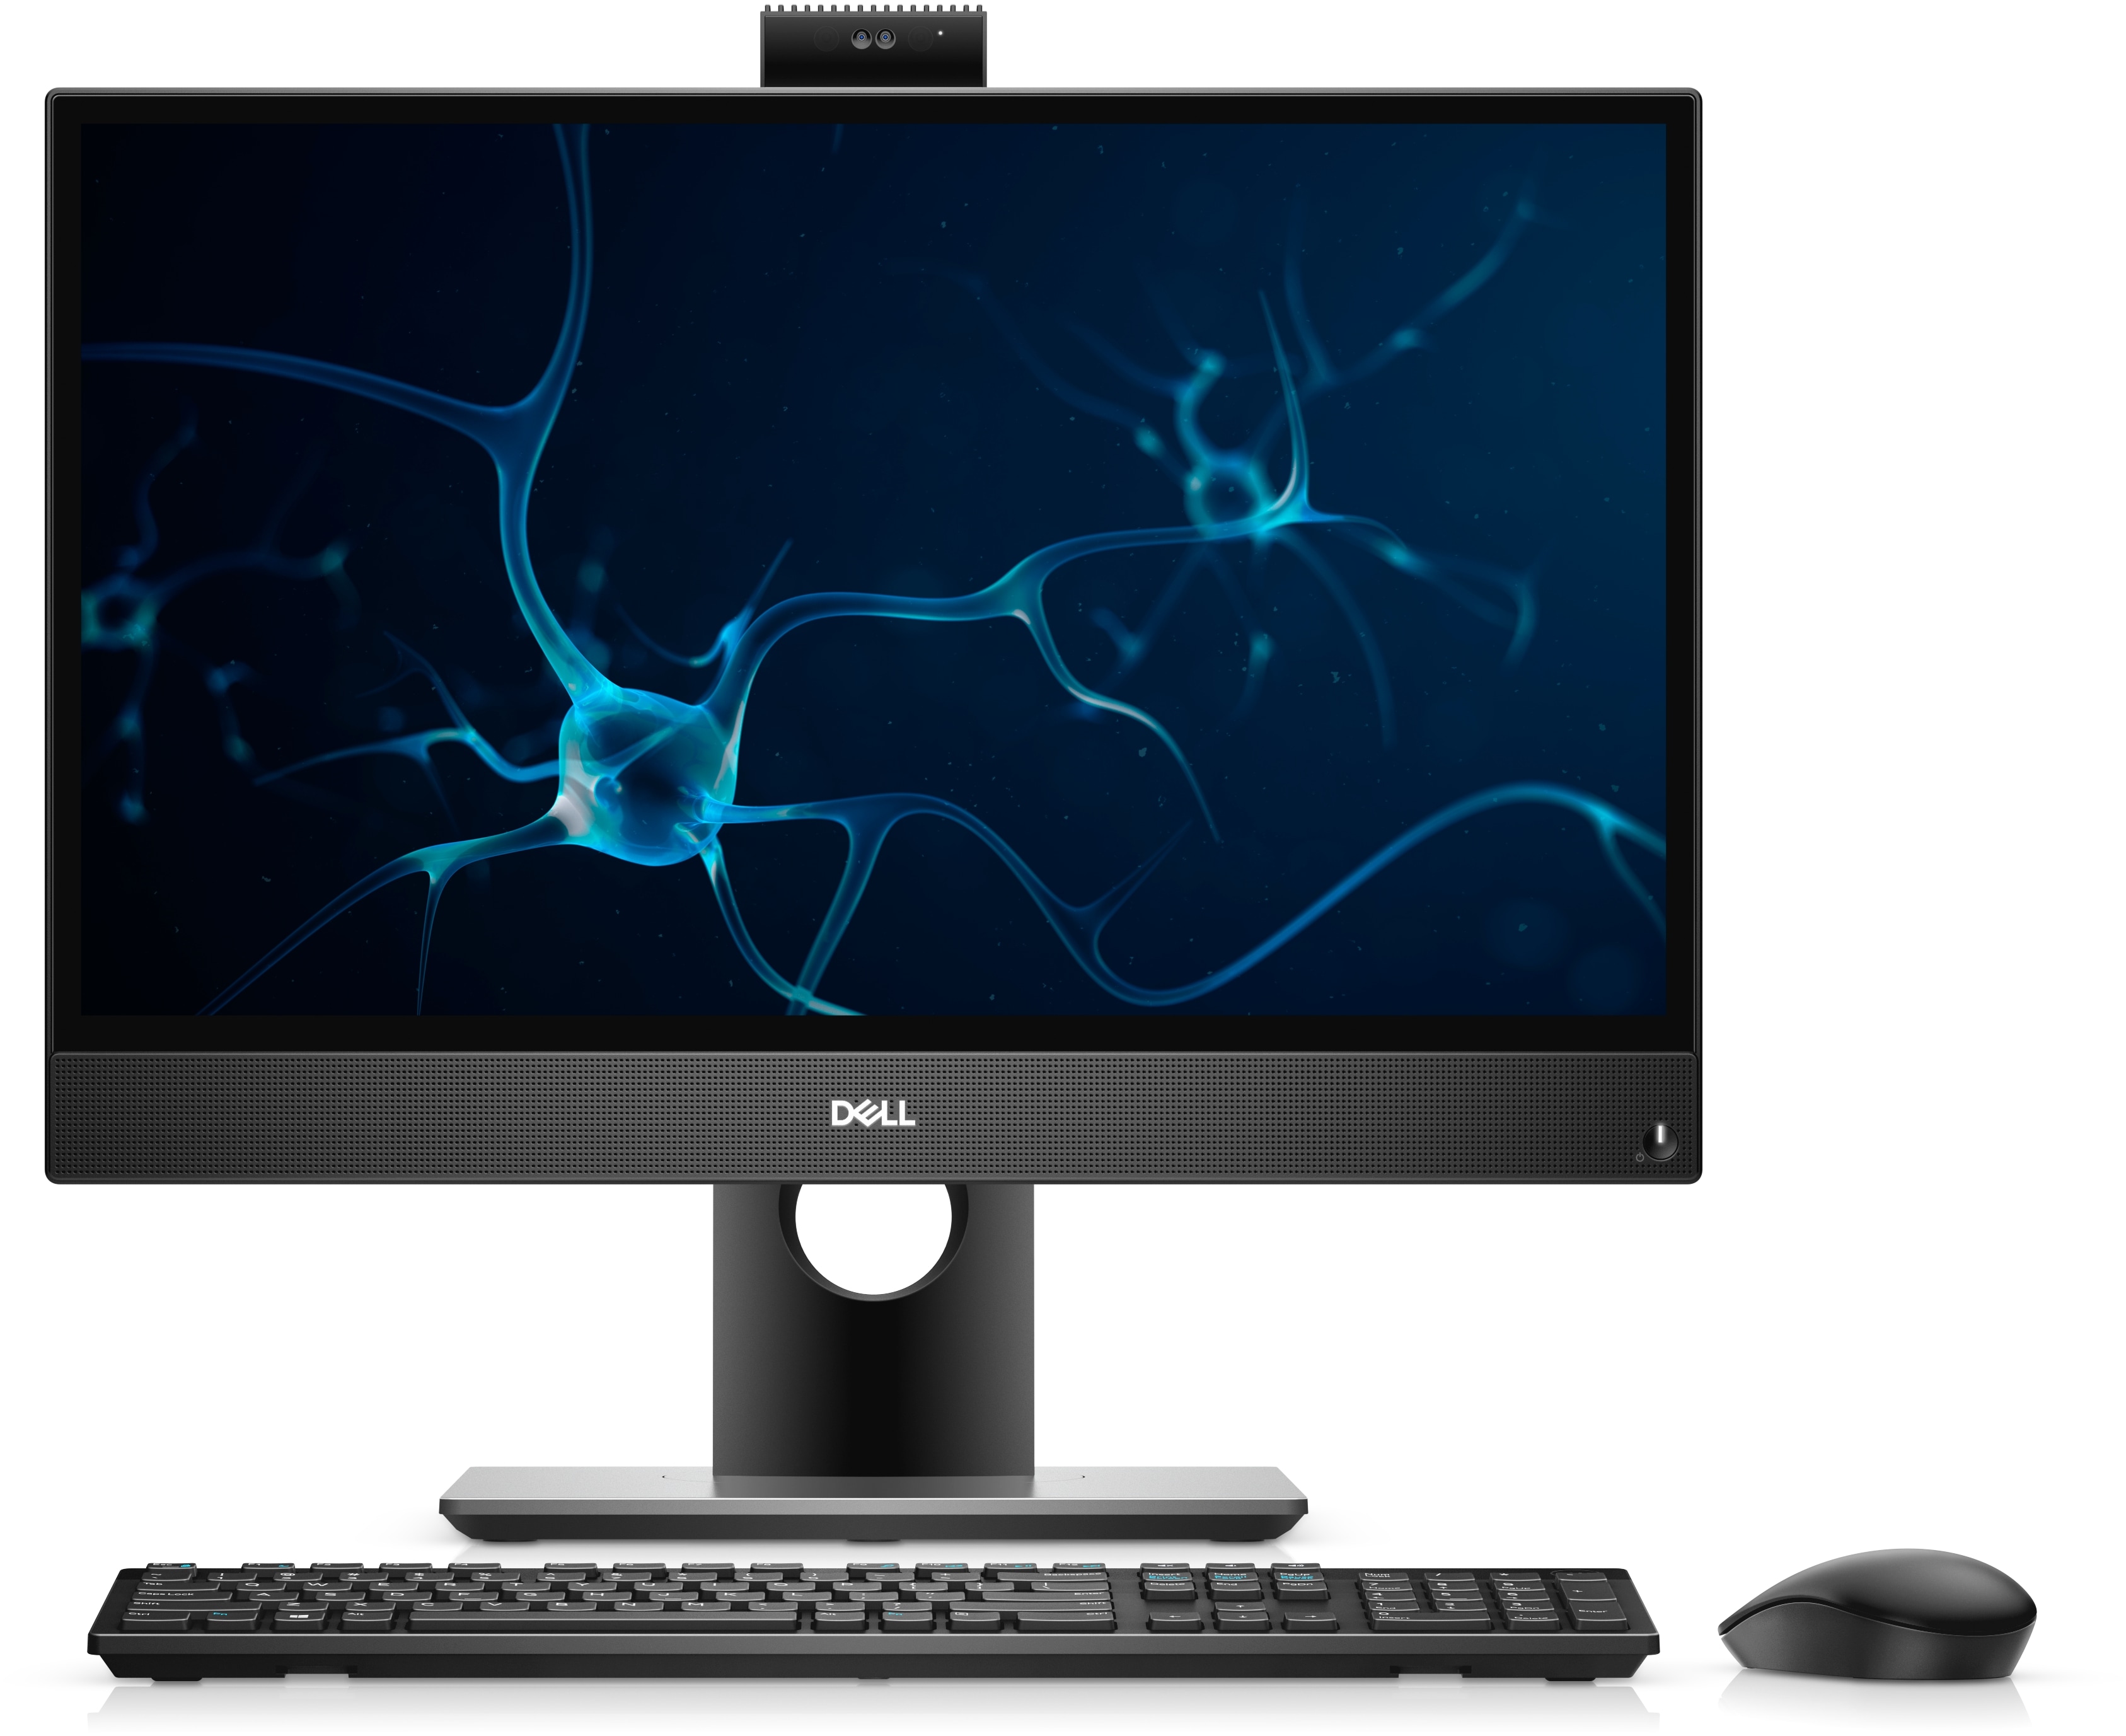 21.5" Dell OptiPlex 3280 All-in-One Desktop PC: i5-10500T, 8GB RAM, 256GB NVMe SSD, w/ Mouse and Keyboard $679 + Free Shipping